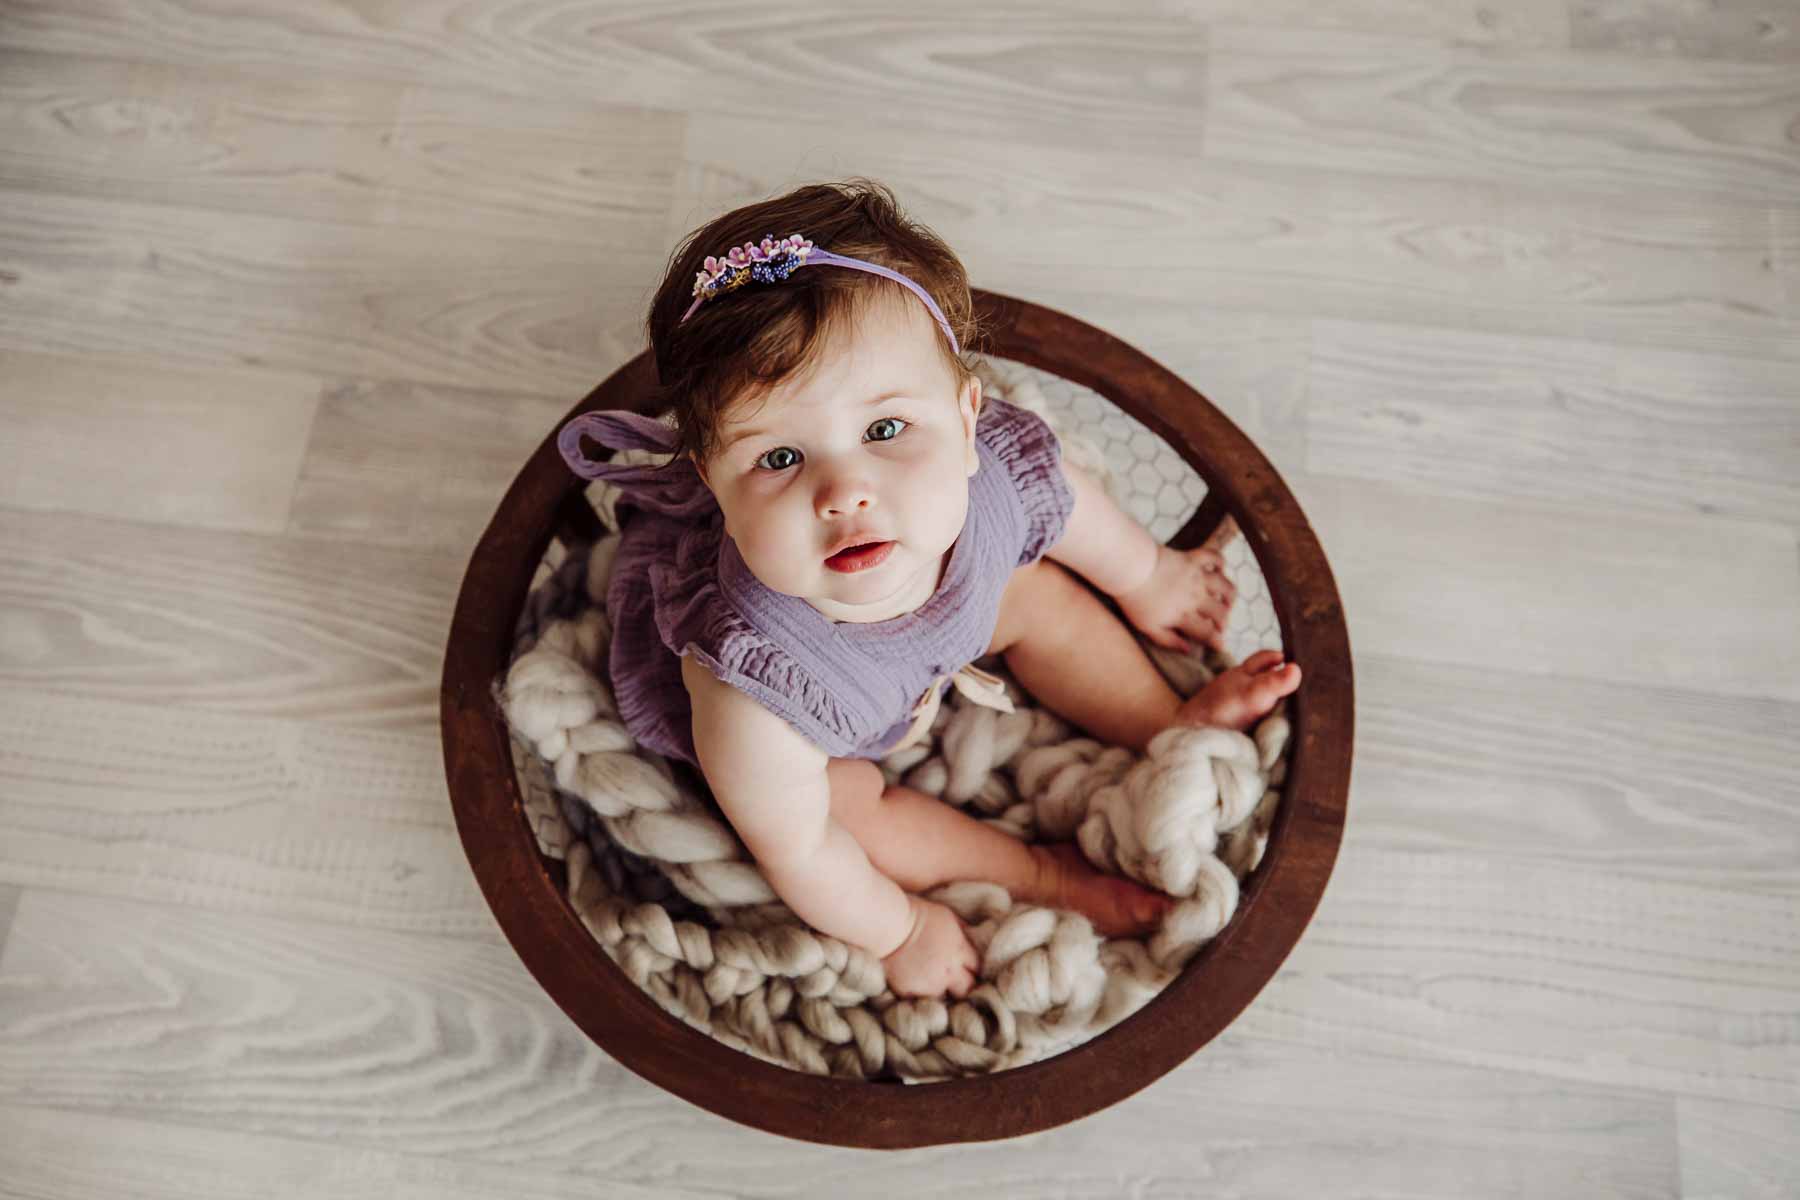 Cake Smash Session - baby girl sits in a round wooden bowl